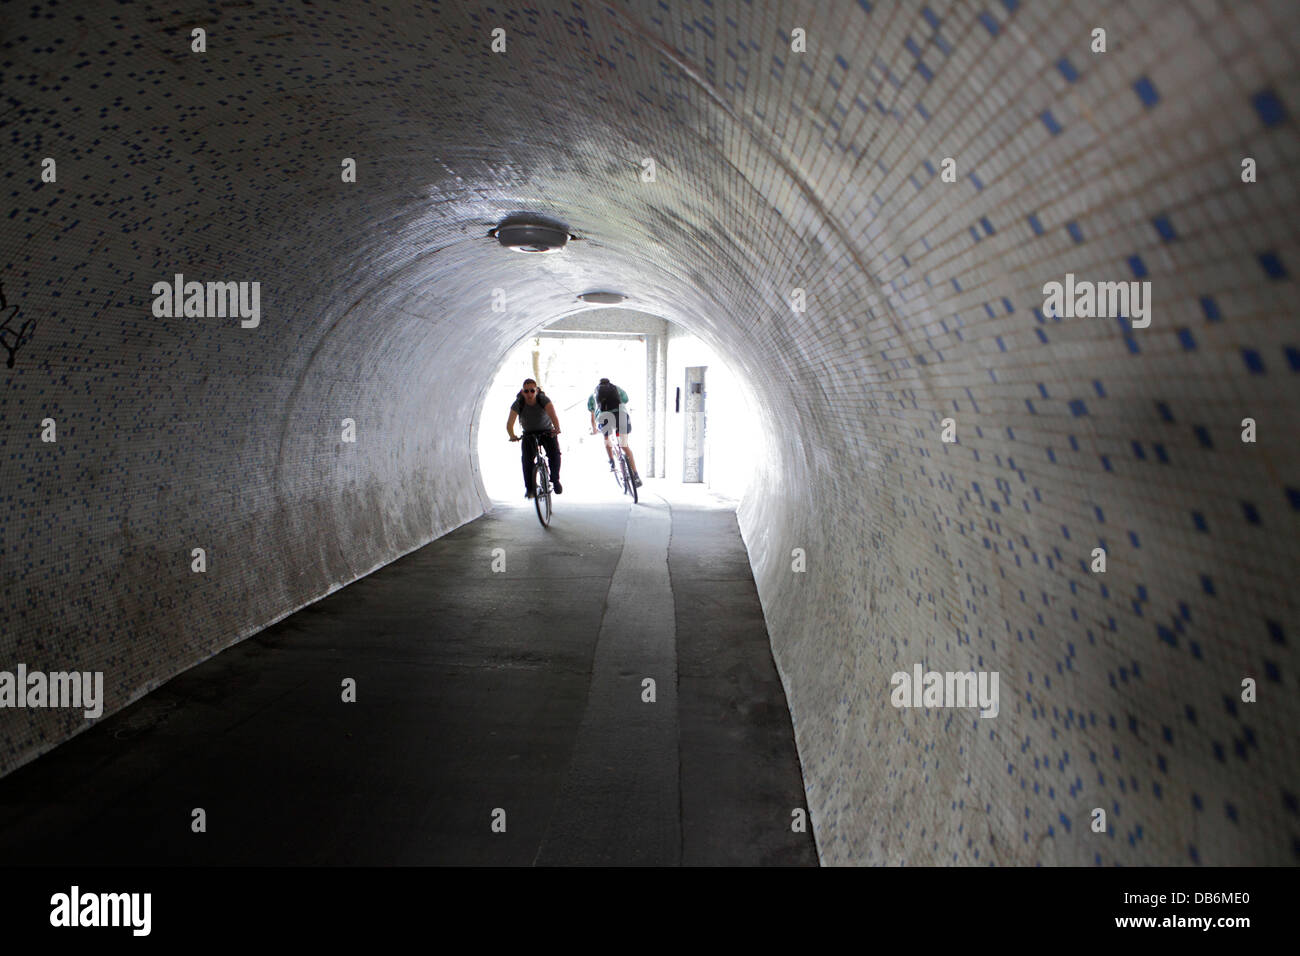 Cyclists in the underground passage, Budapest, Hungary Stock Photo